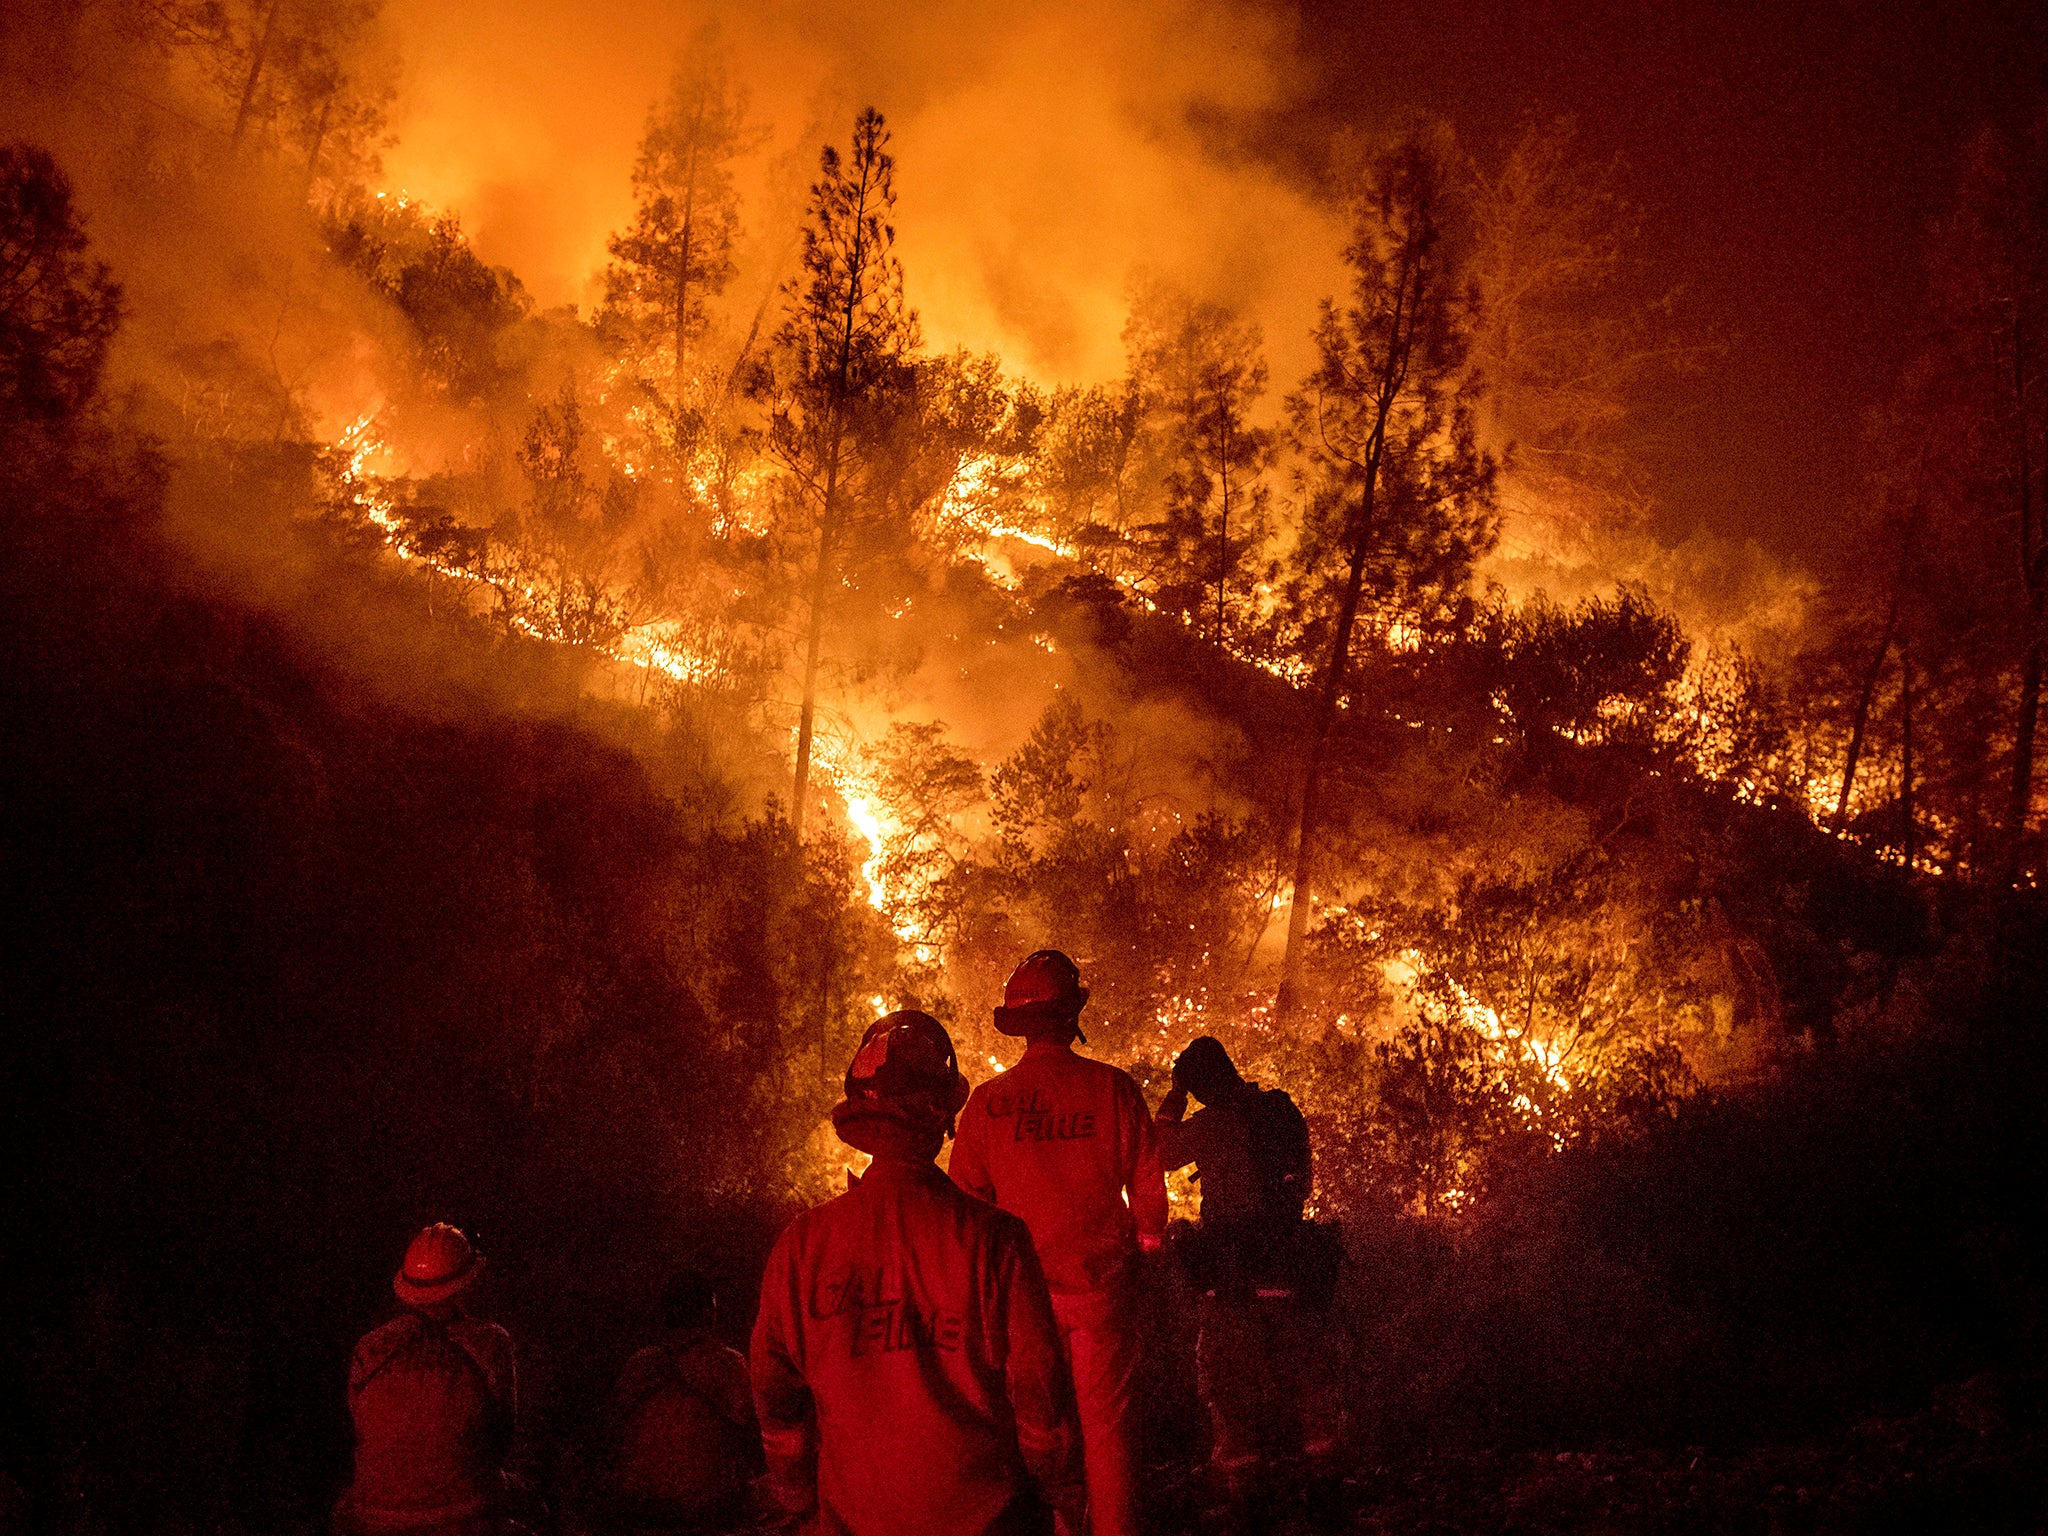 More than one million acres have been burned by wildfires in California this year